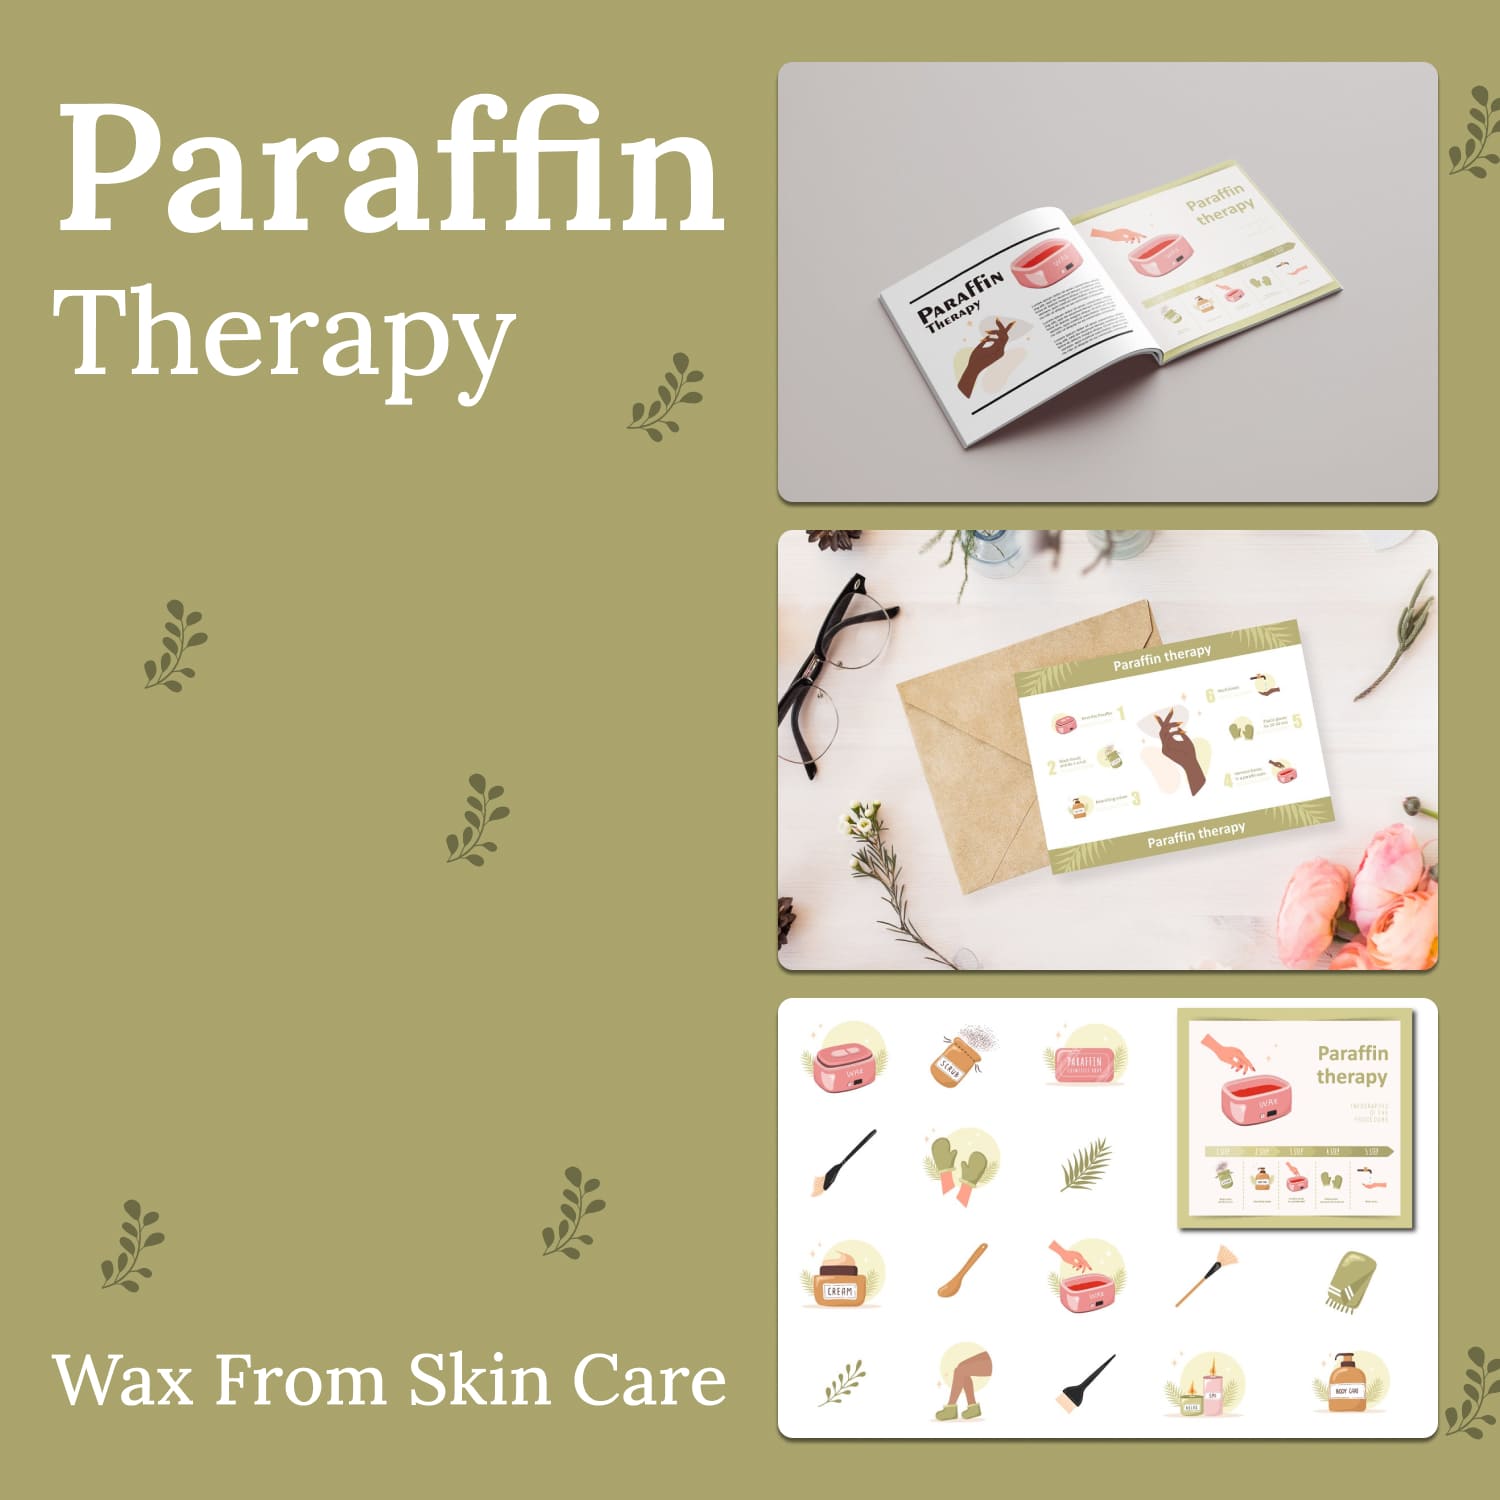 Paraffin therapy - main image preview.